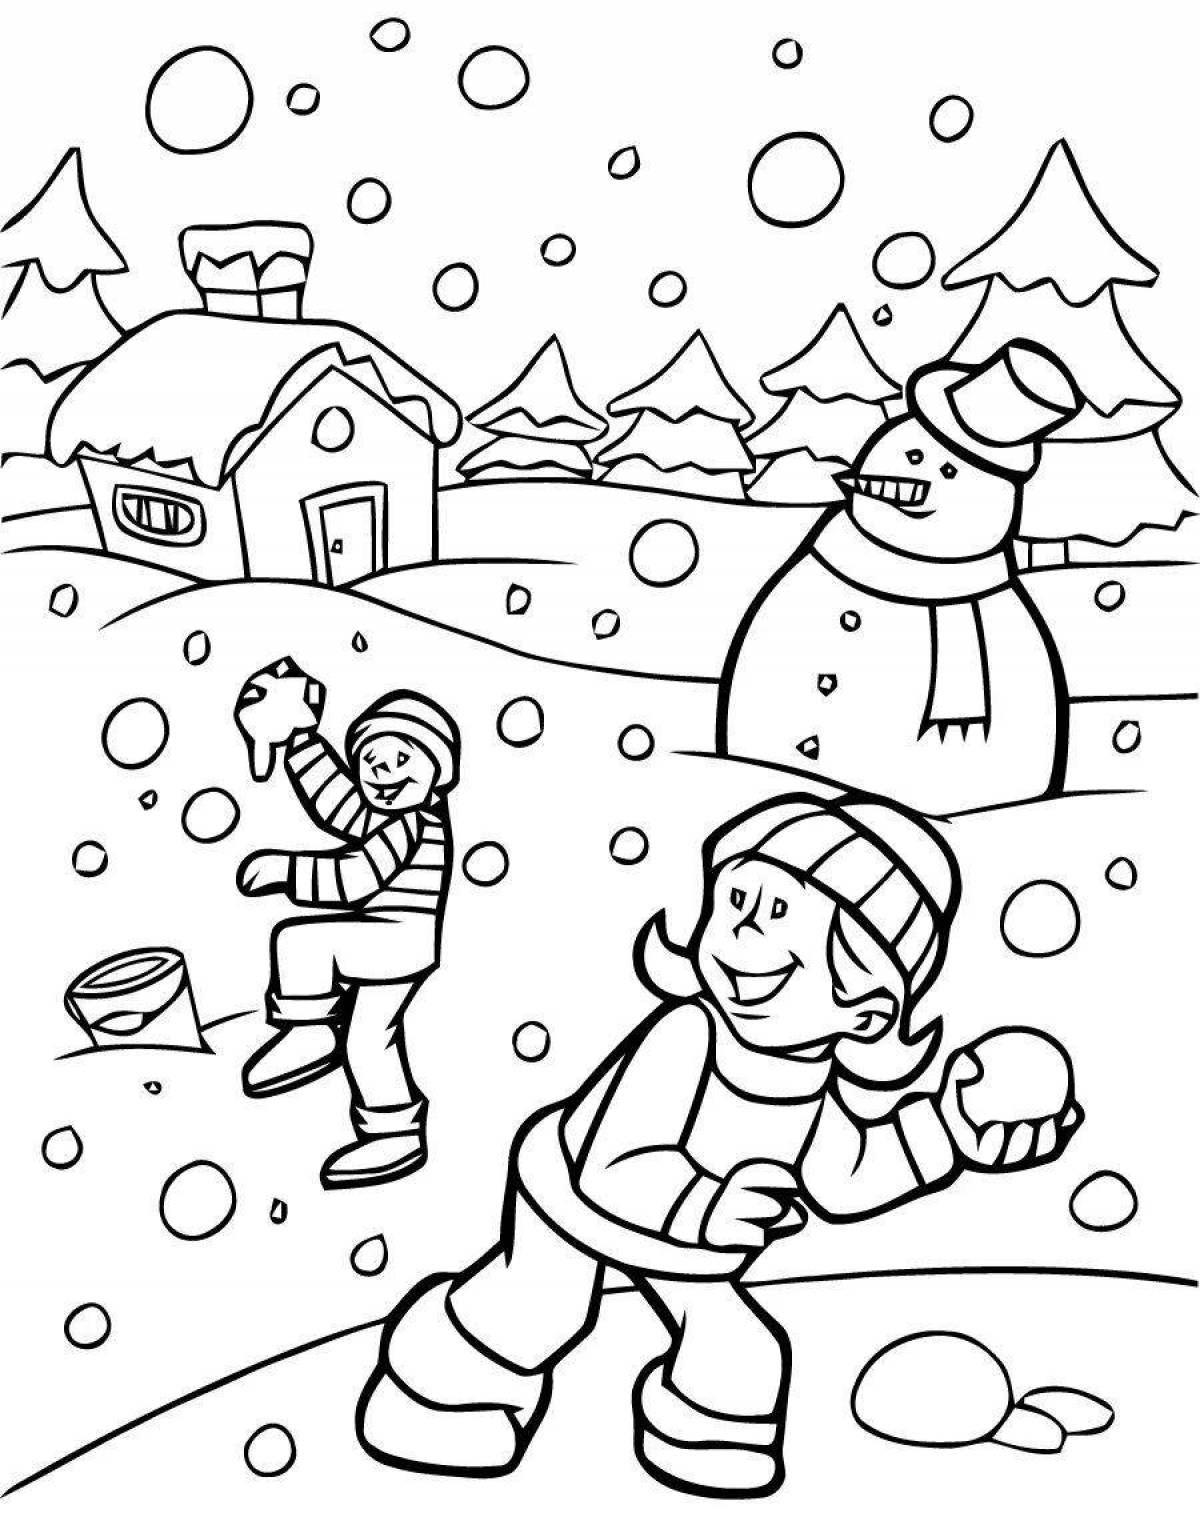 Sunny January coloring page for kids